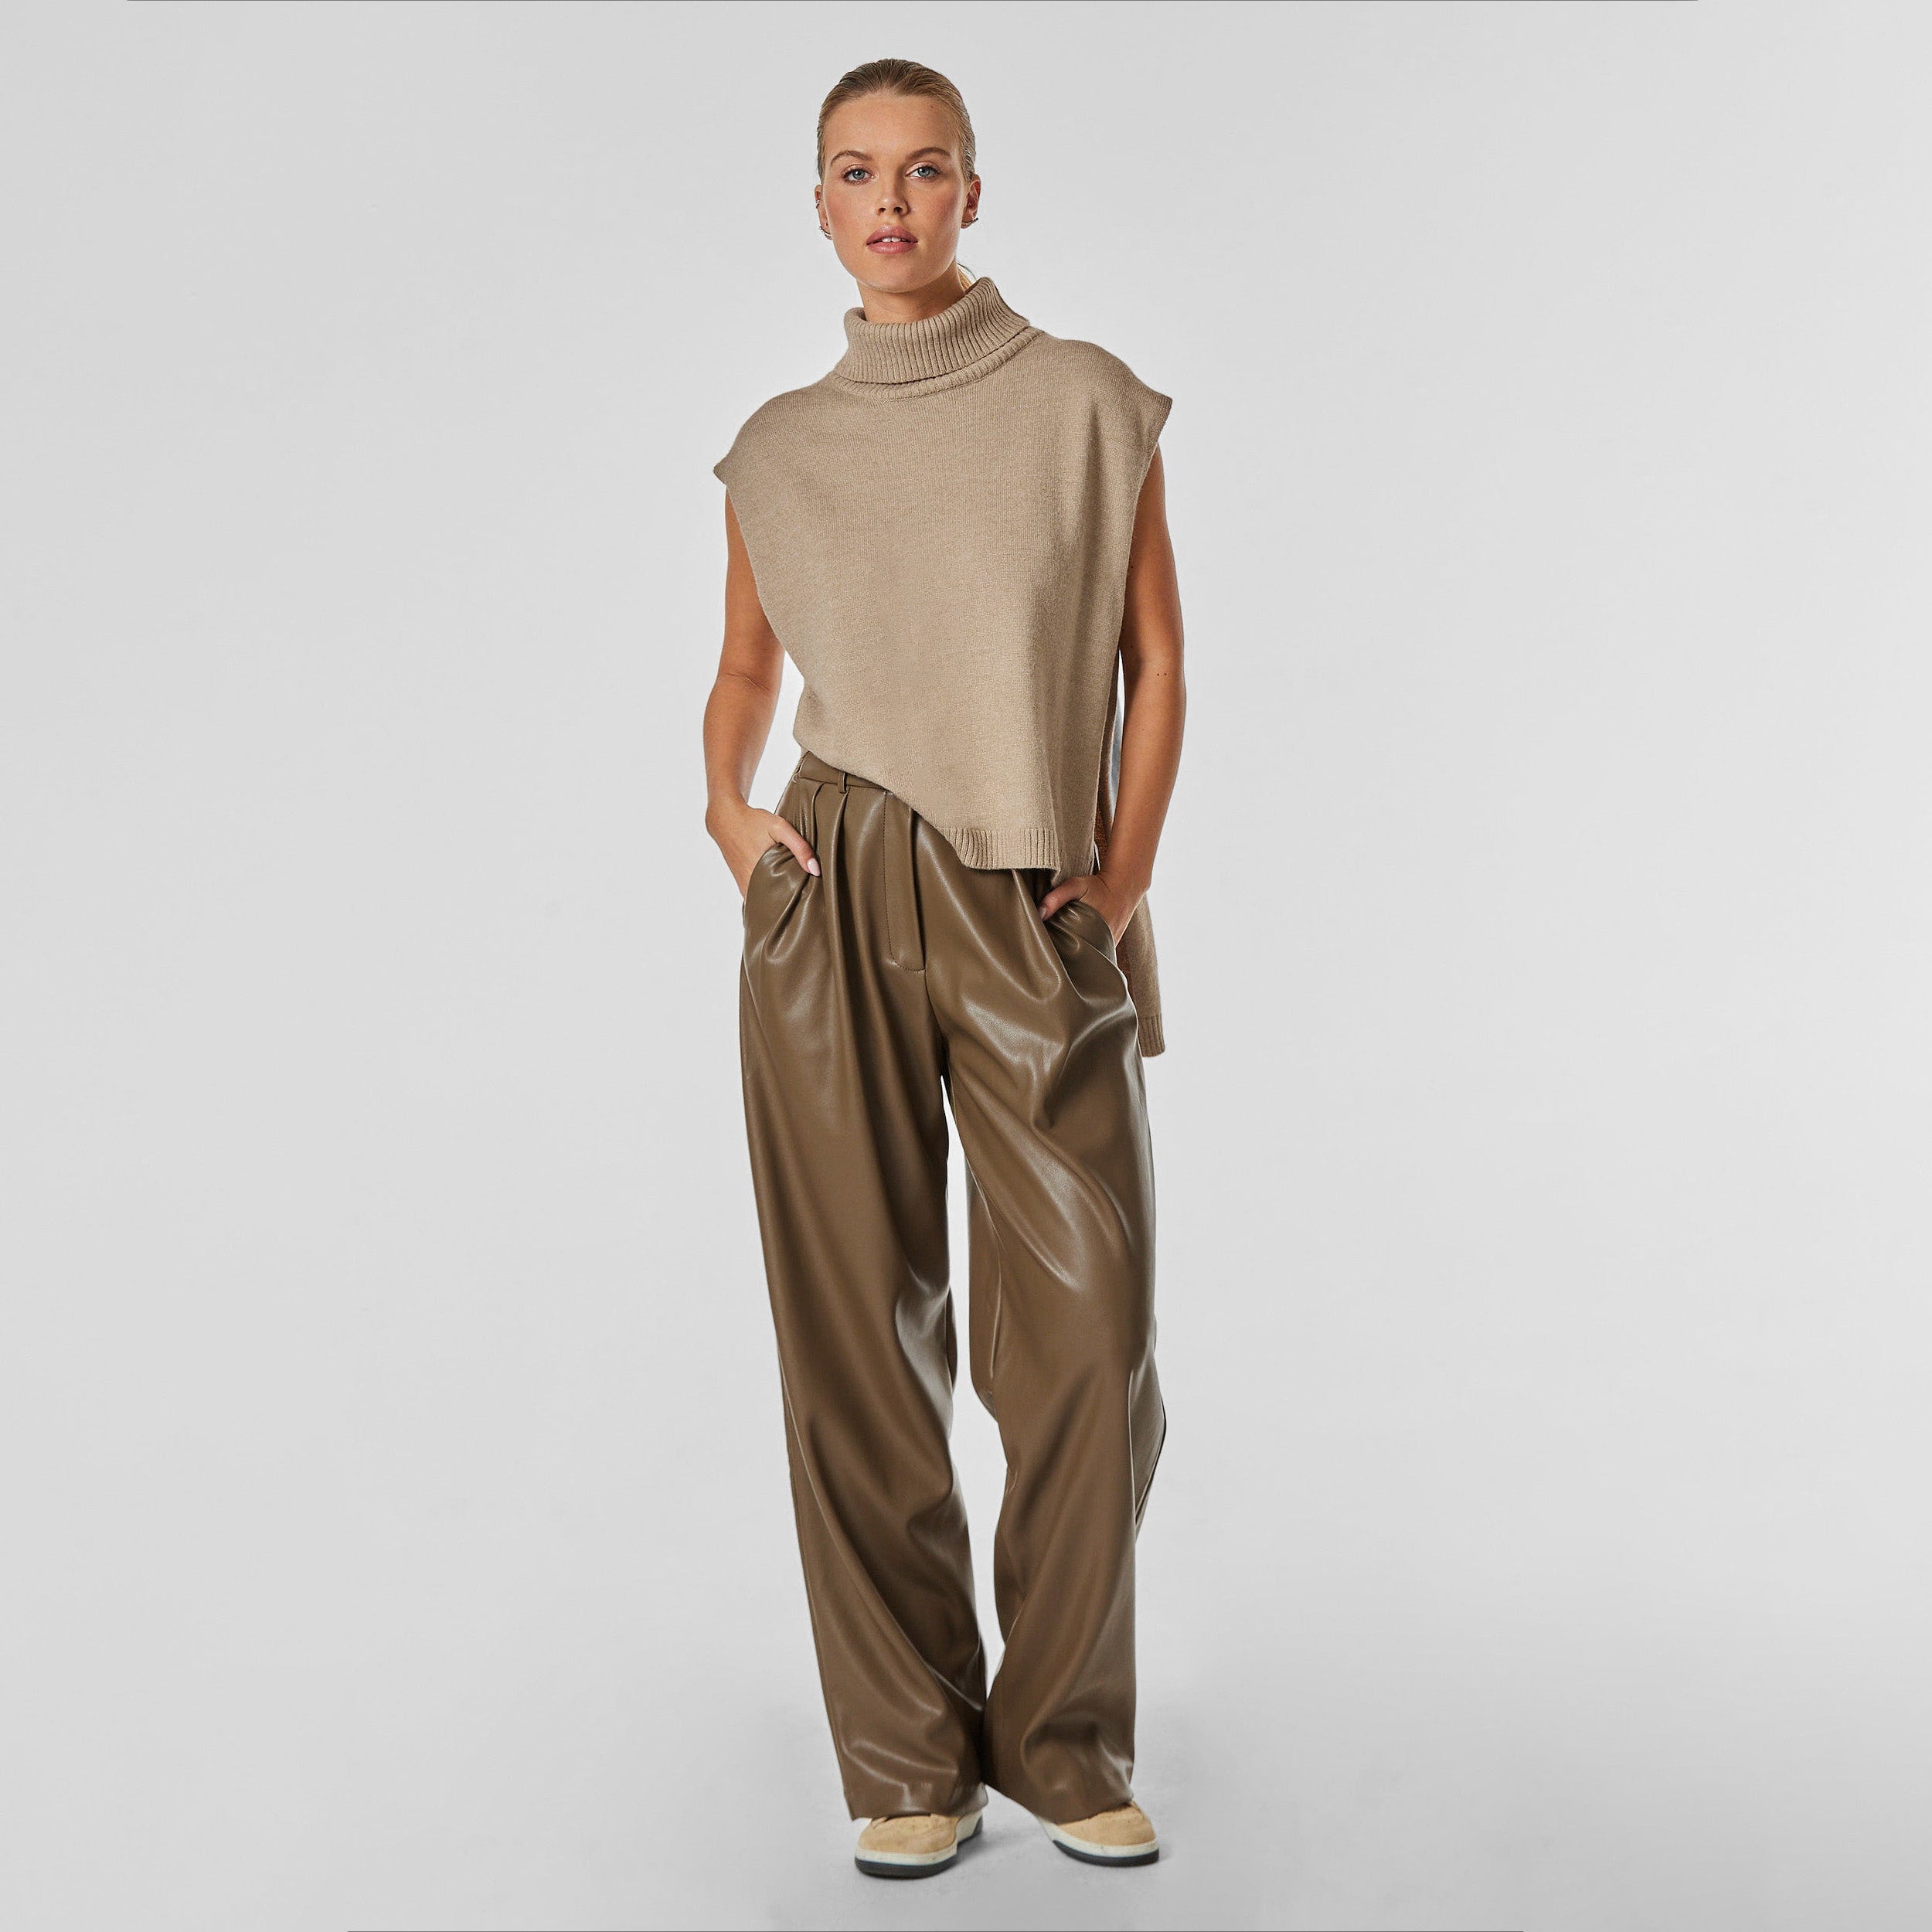 Full body front view of woman wearing sleeveless mocha sweater and brown high rise vegan leather pleated trousers.